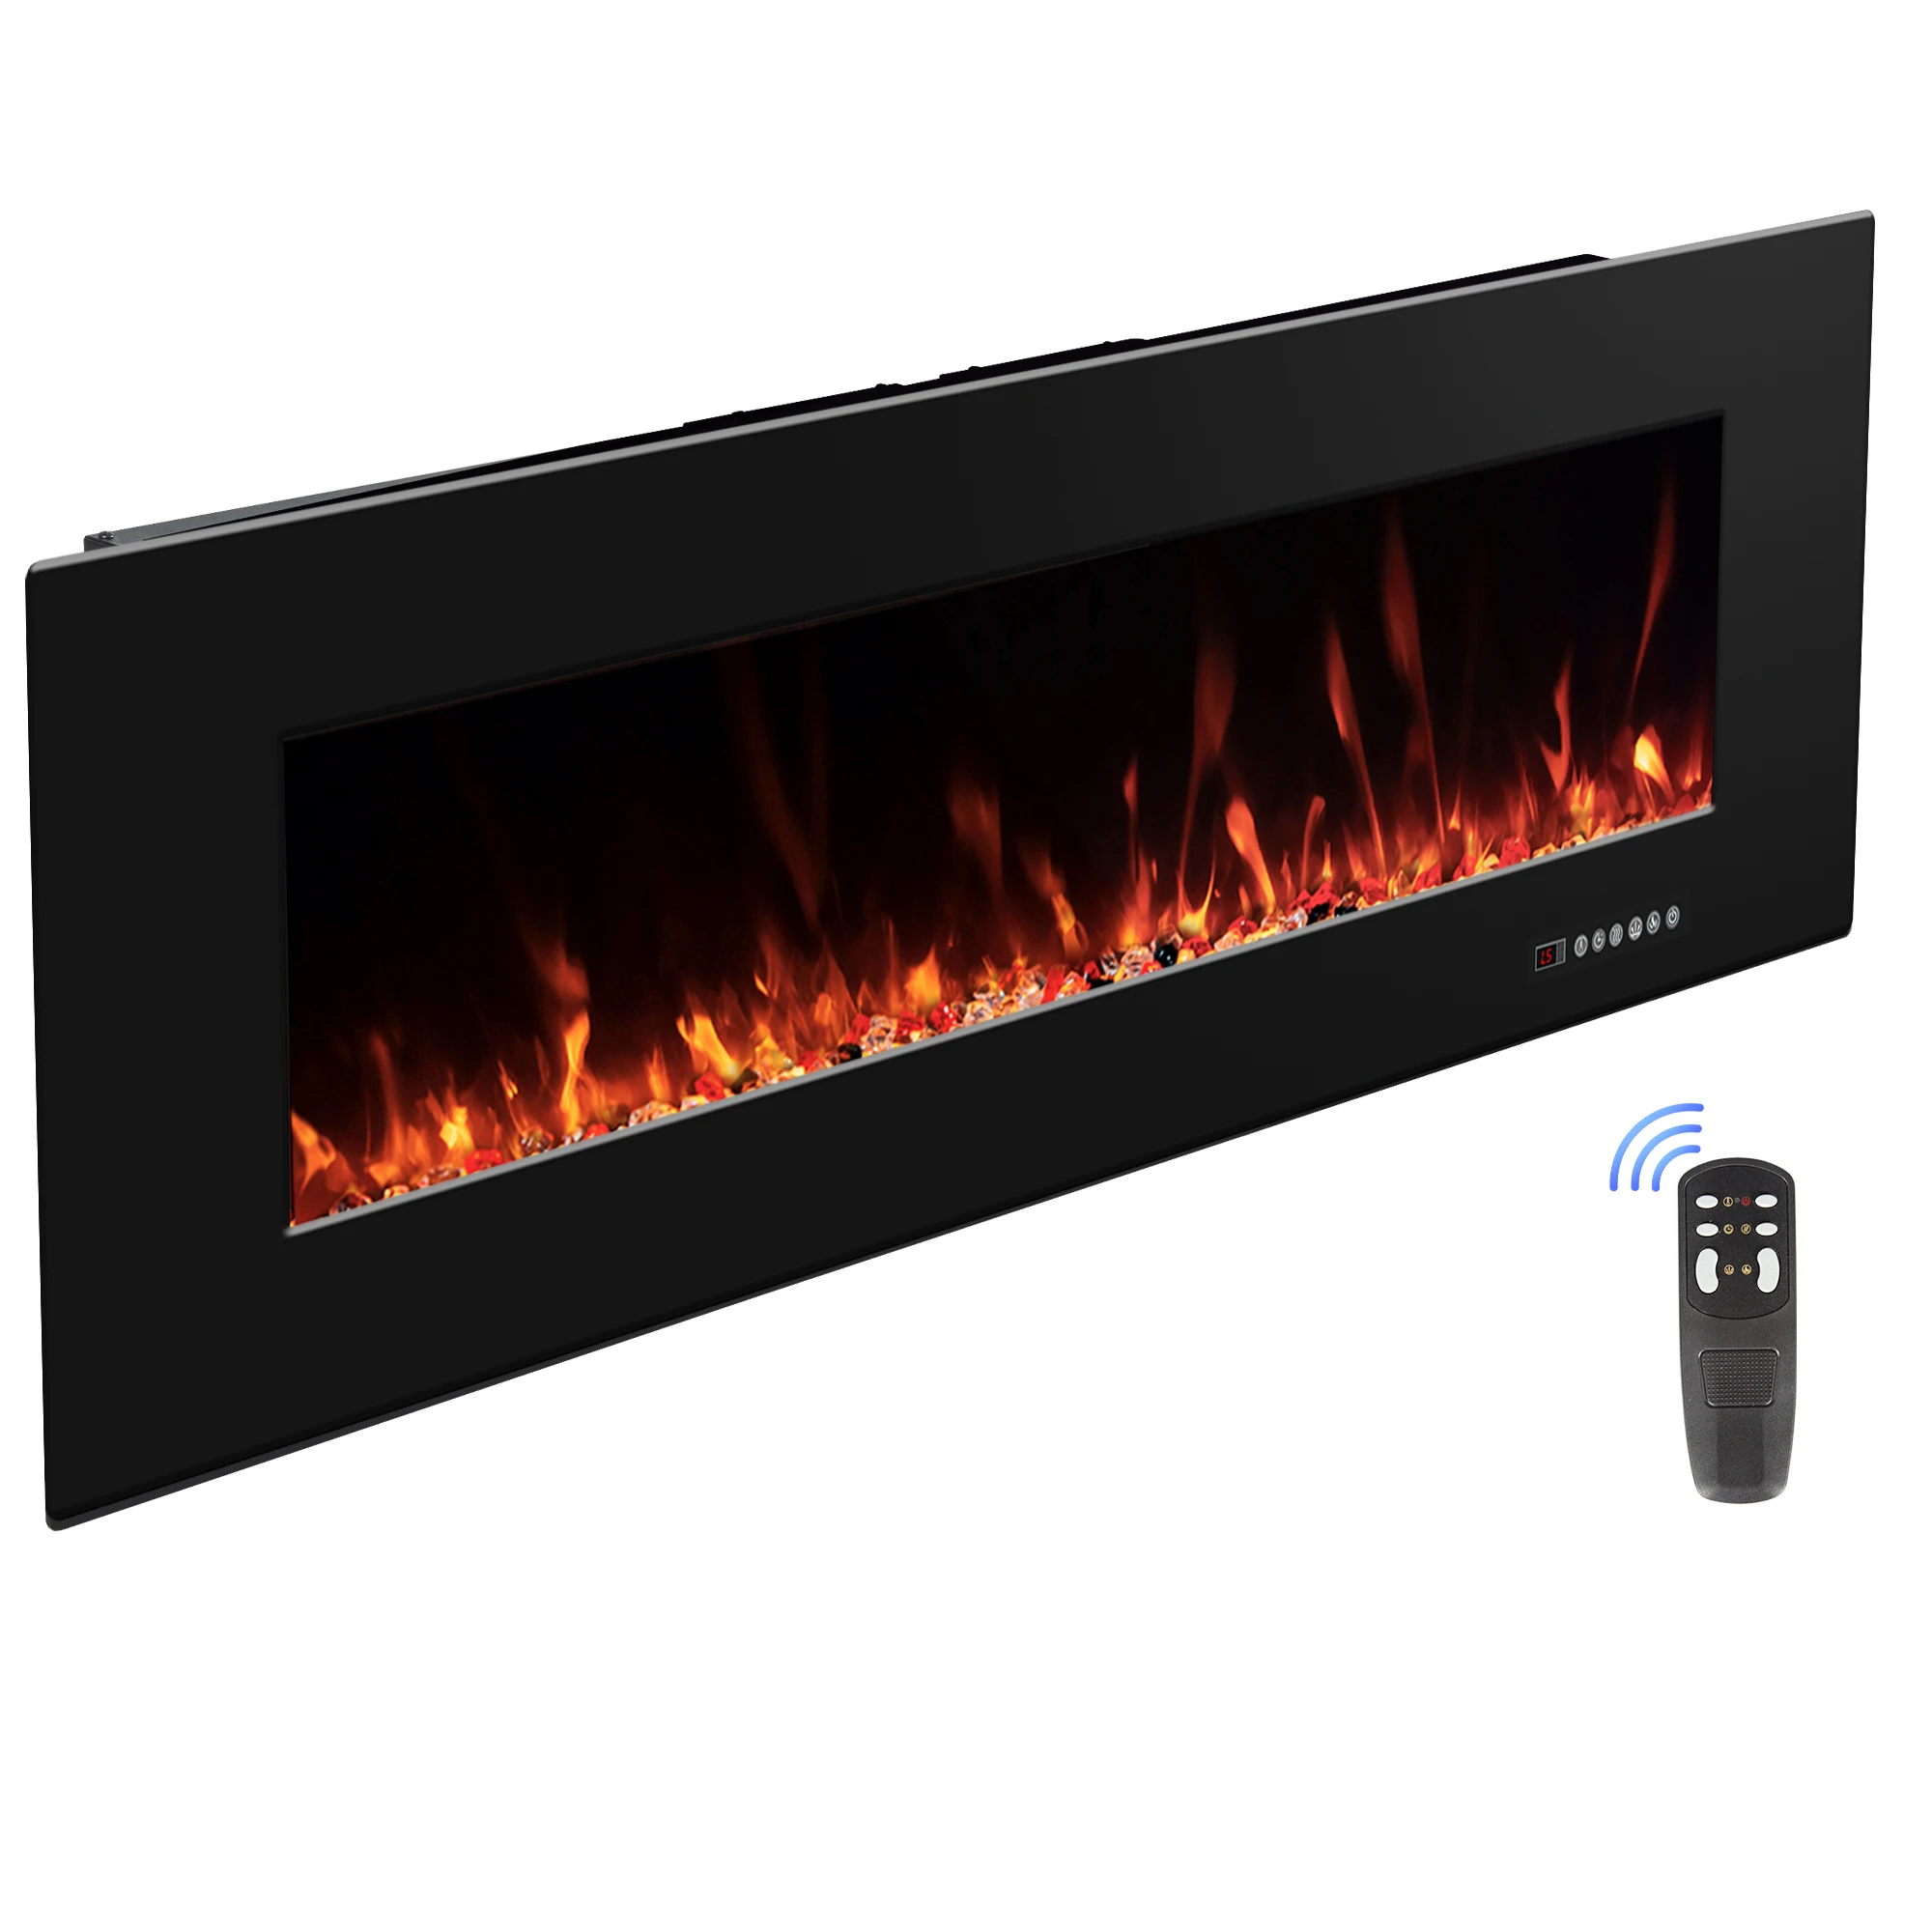 Luxstar 72 Inch Electric Fireplace Wall Mounted Heaters Not for Recessed Indoor Electric Fireplaces to Warm Room Home